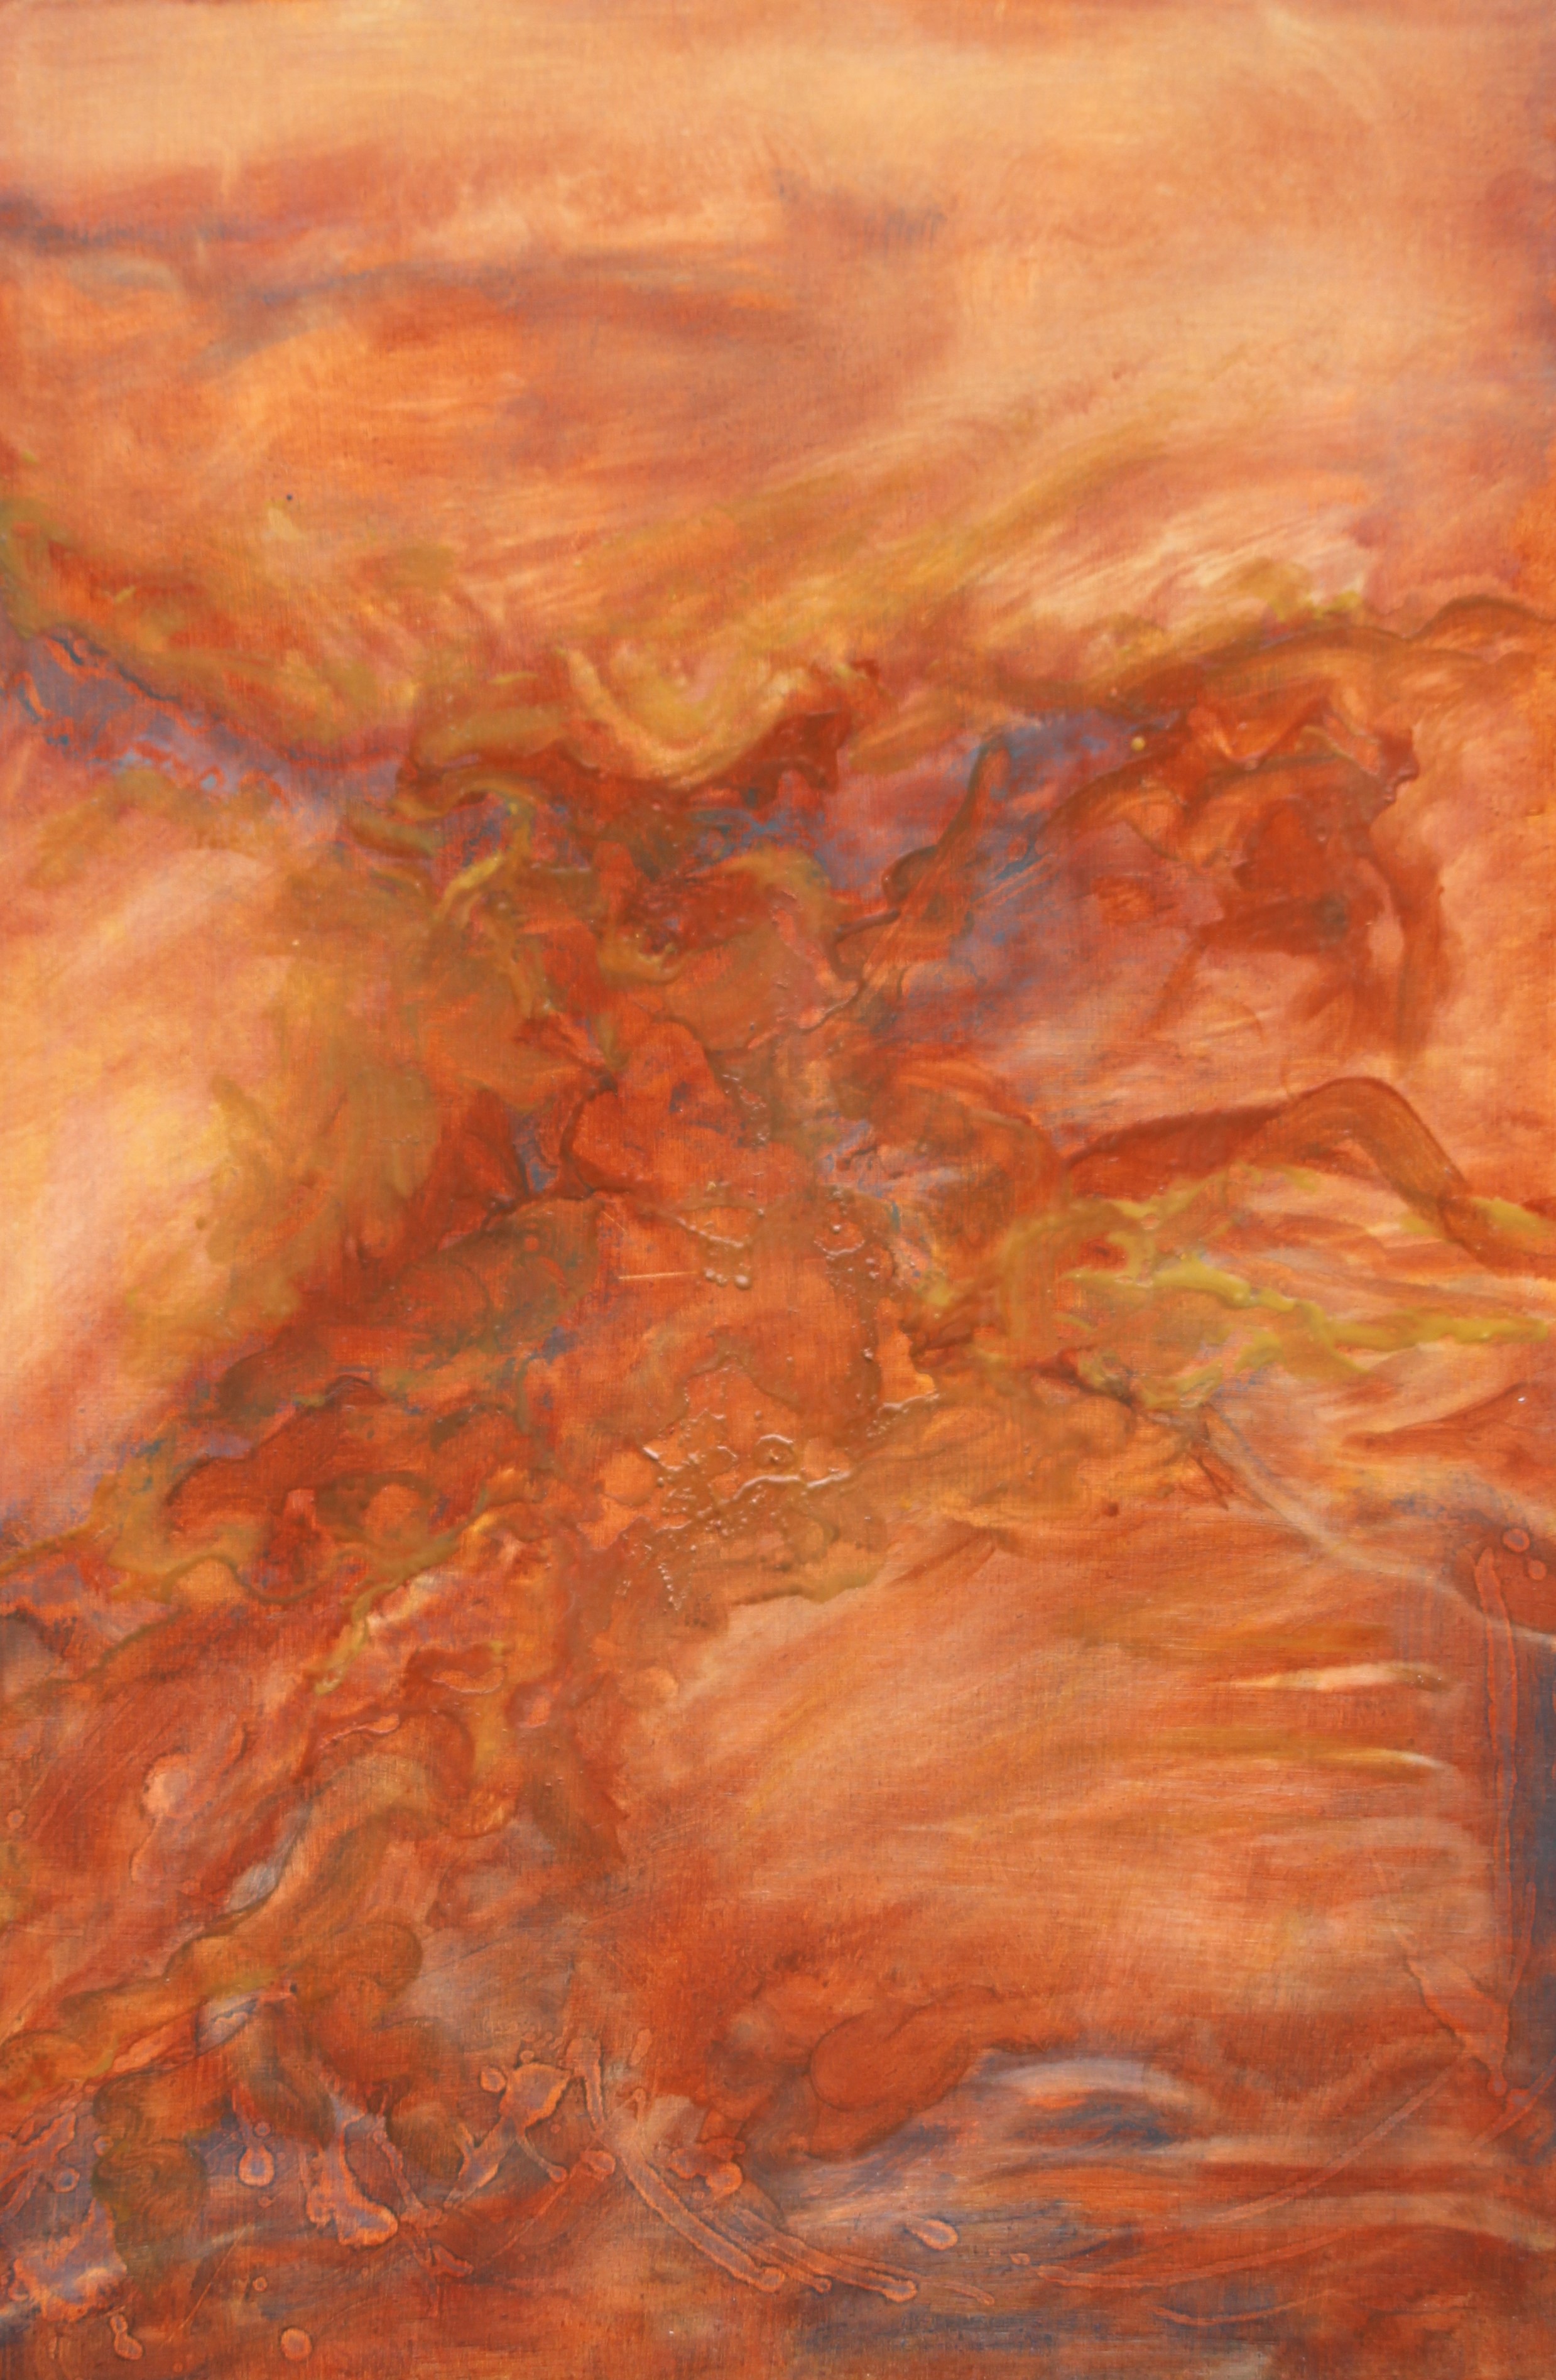 An orange abstract painting with orange, yellow and blue swirls in the foreground. It has a vague horizon line and a blurred background.